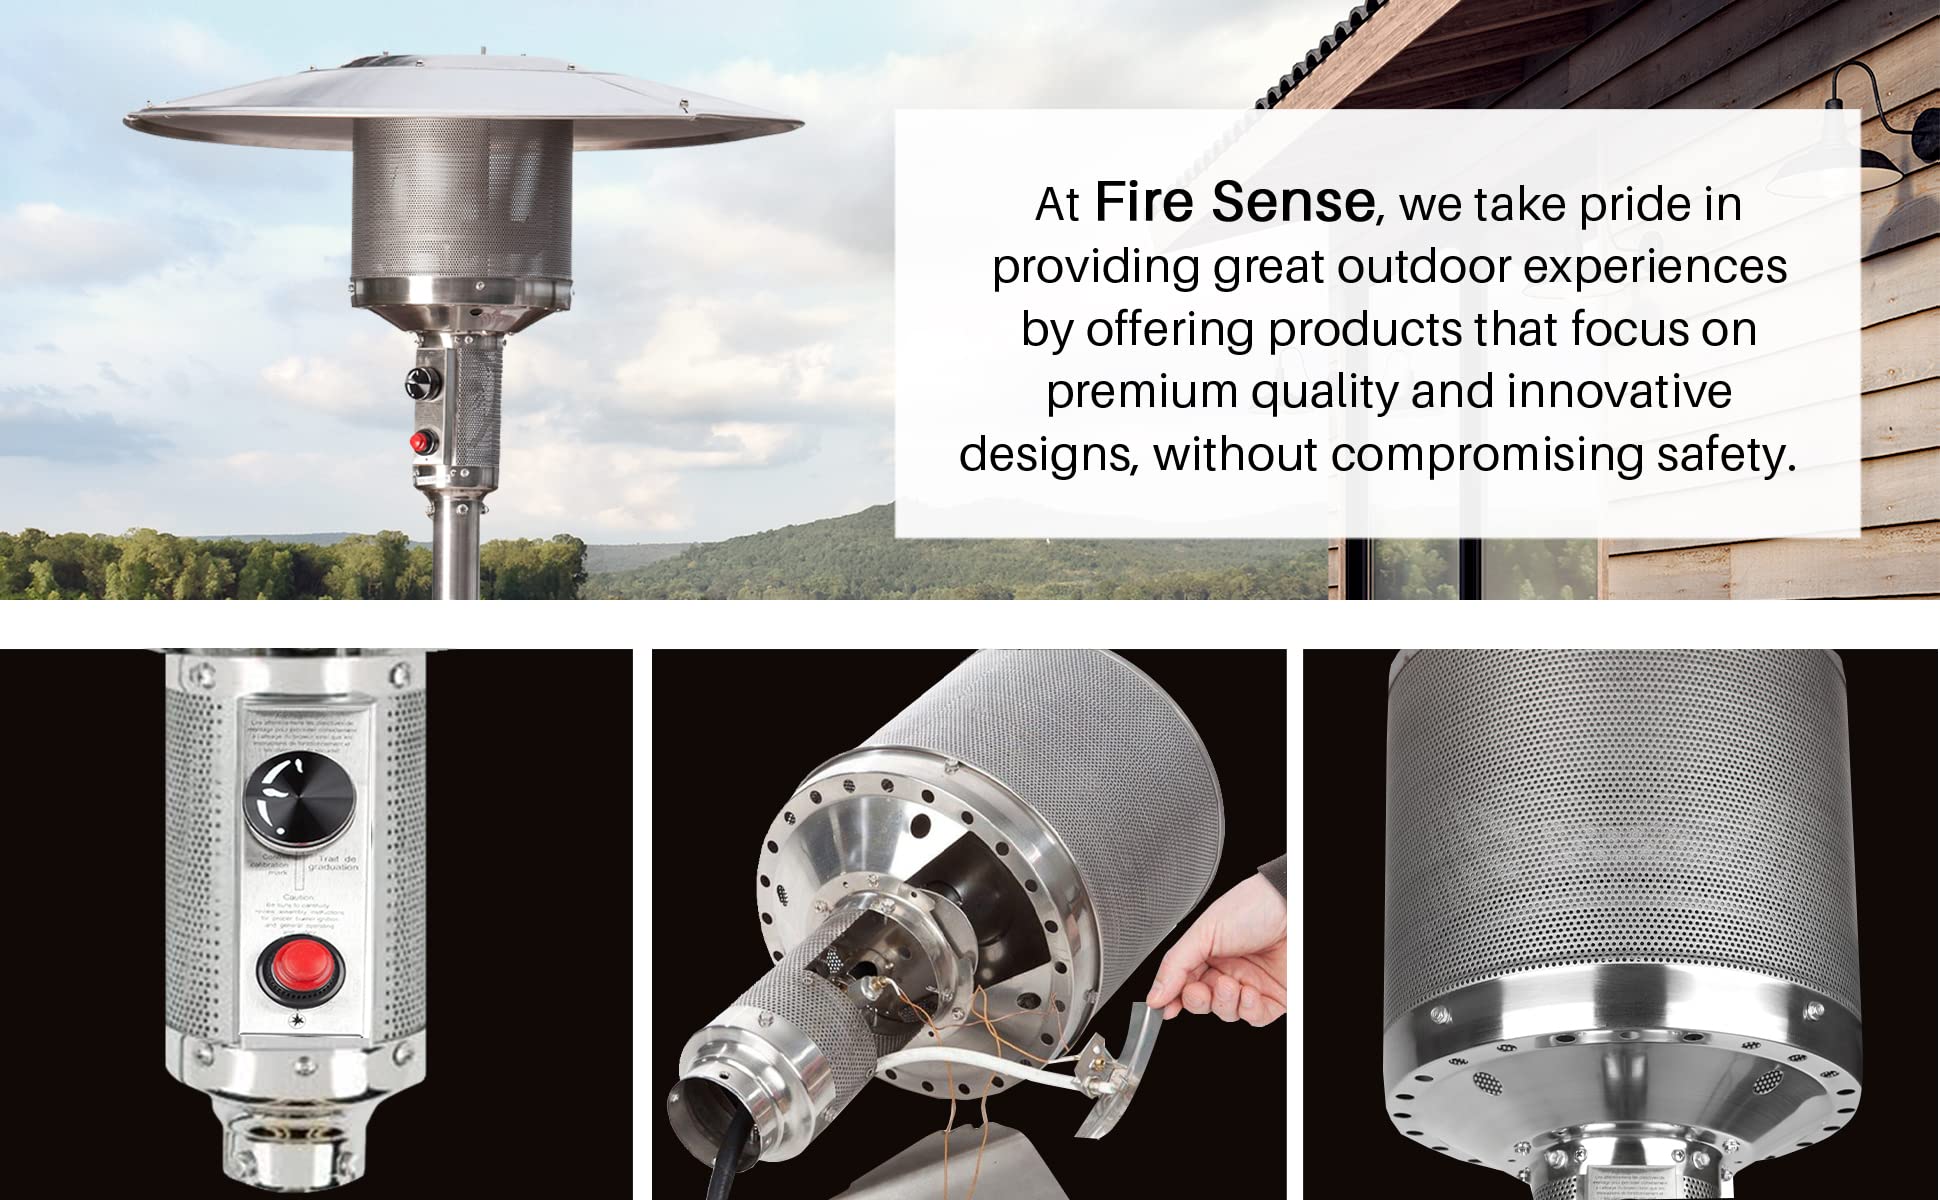 Fire Sense 63047 Pro Series Head Assembly 46,000 BTU Propane Patio Heater Head Replacement Fits With Model: Pro series 61436